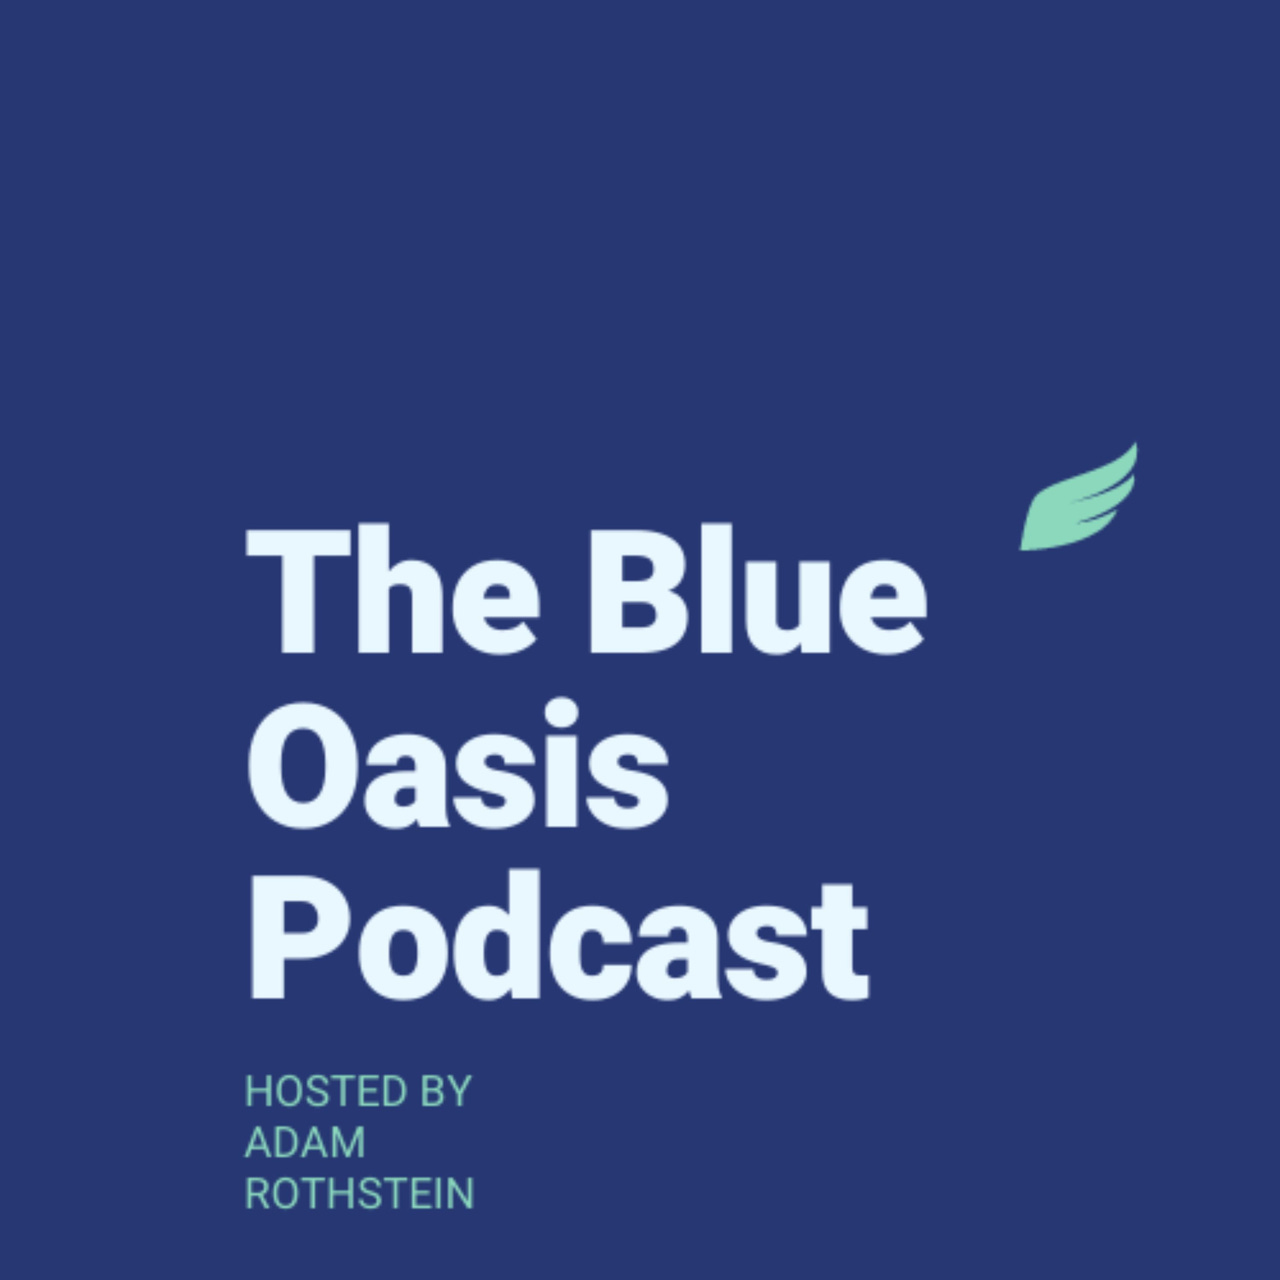 The Blue Oasis Podcast Episode #96: All about art Feat. Michaell Magrutsche